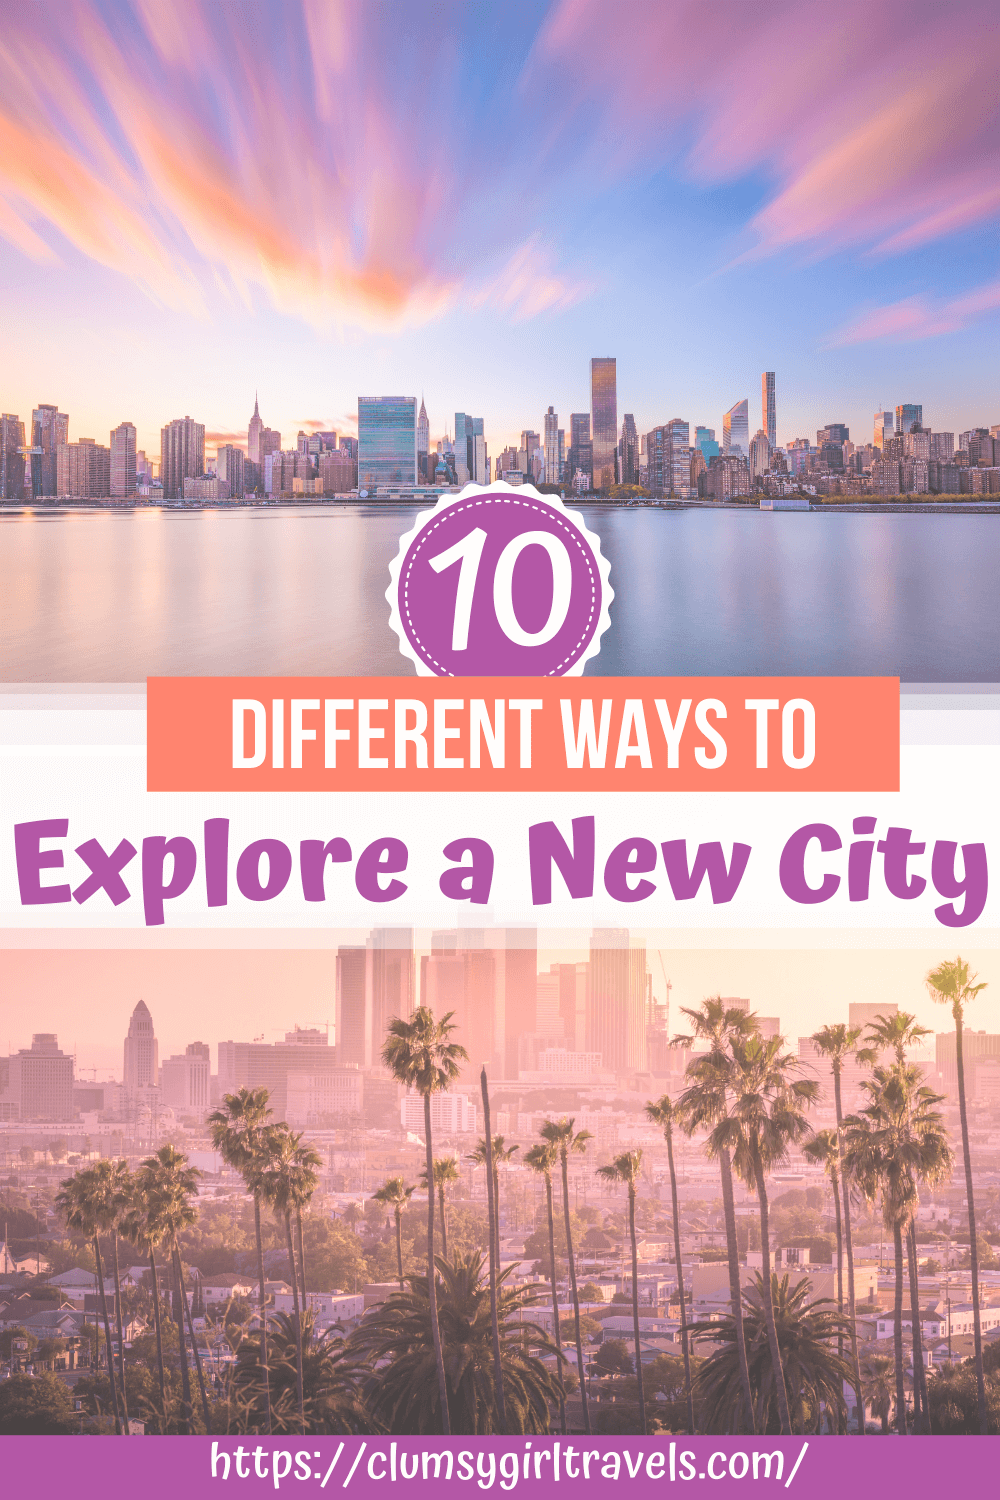 Do you want different and unique ways to explore a new city? Not to worry! Here are 10 ideas on how you can explore a new city. #exploreanewcity #visitinganewcity